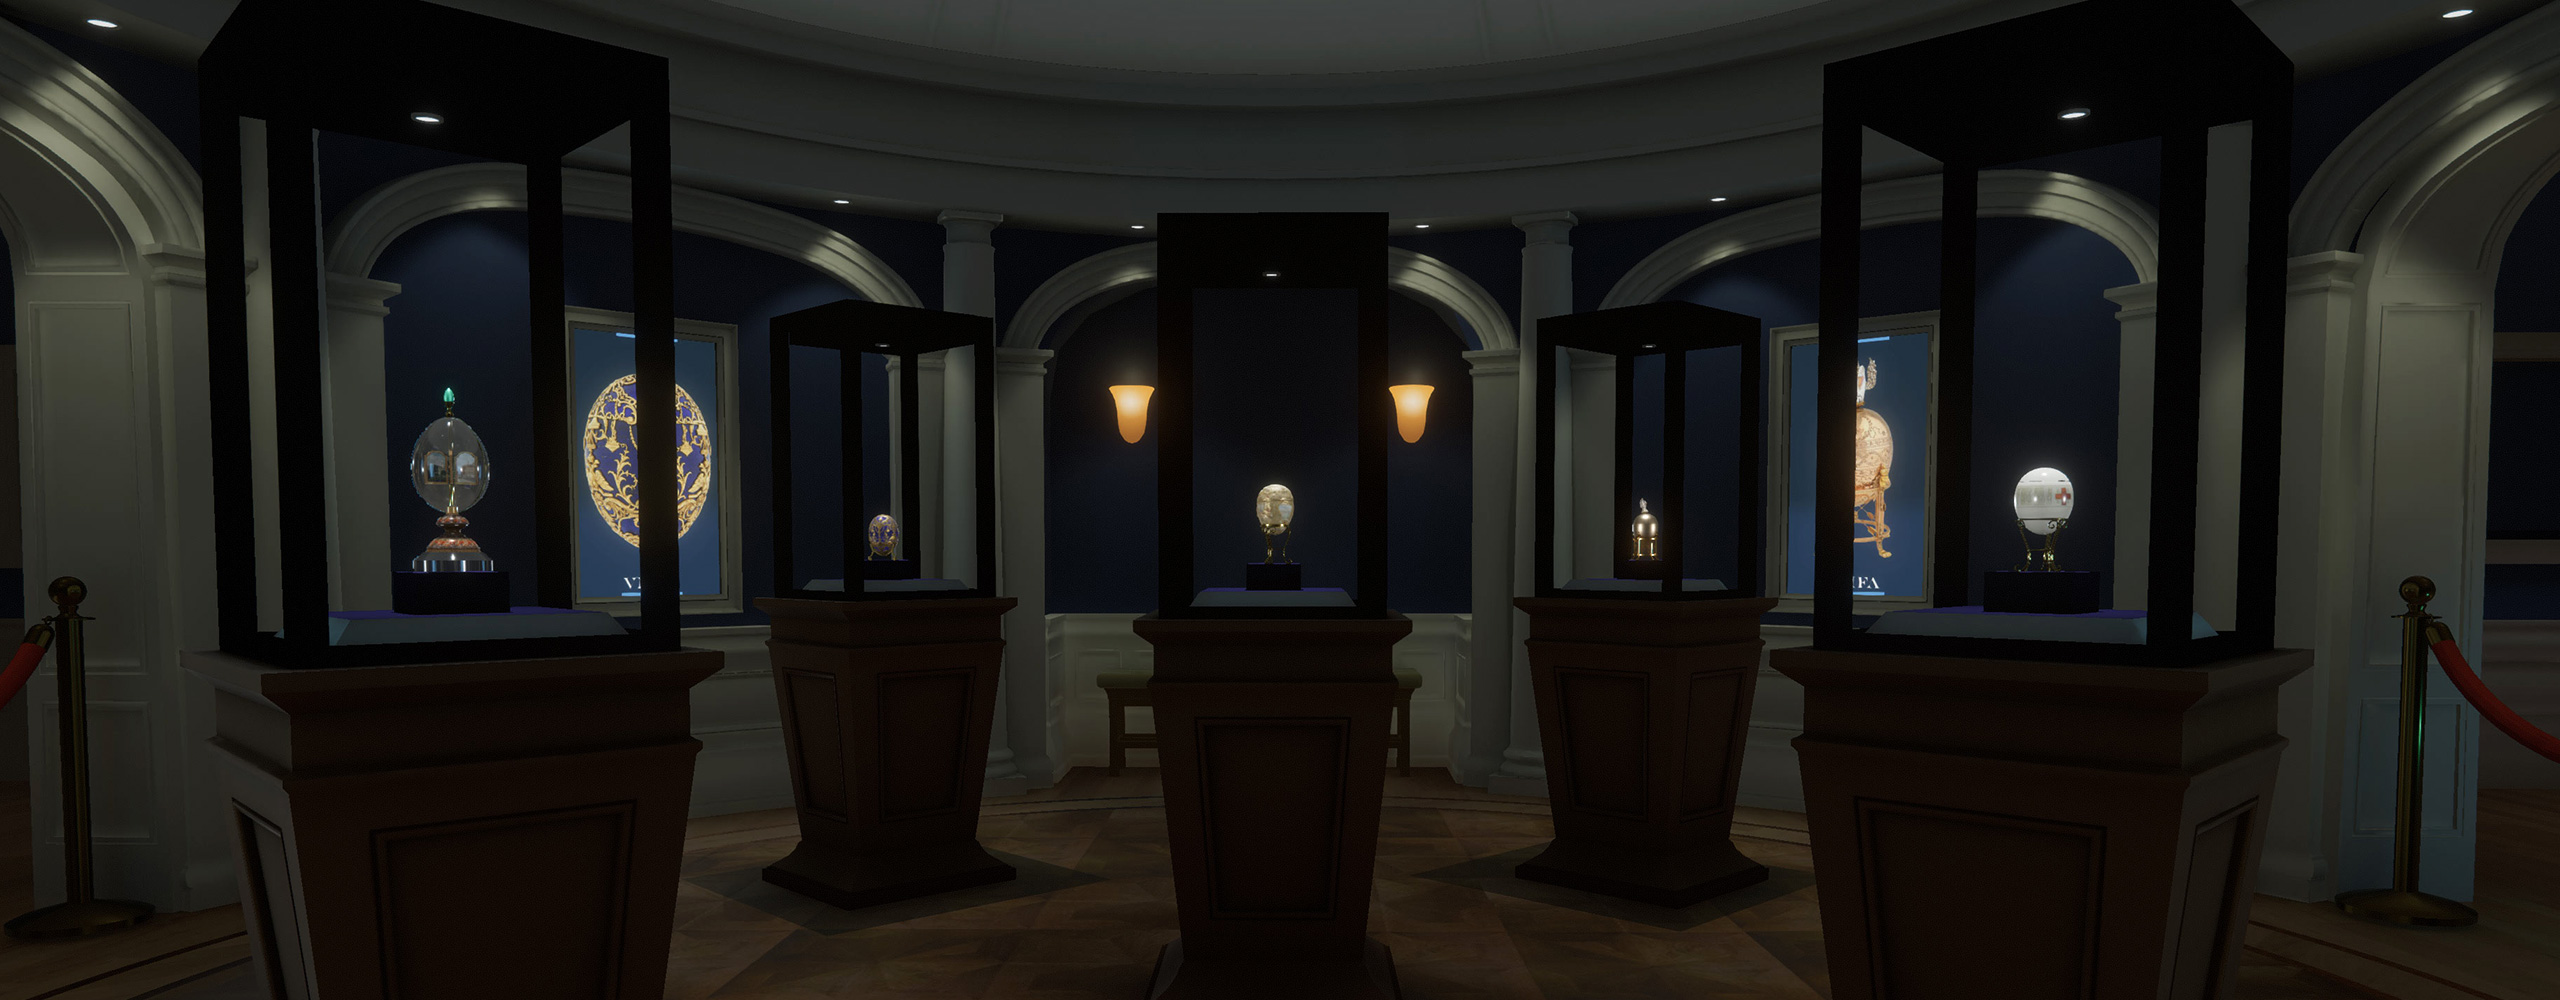 Room Scale Museum Experience - Faberge